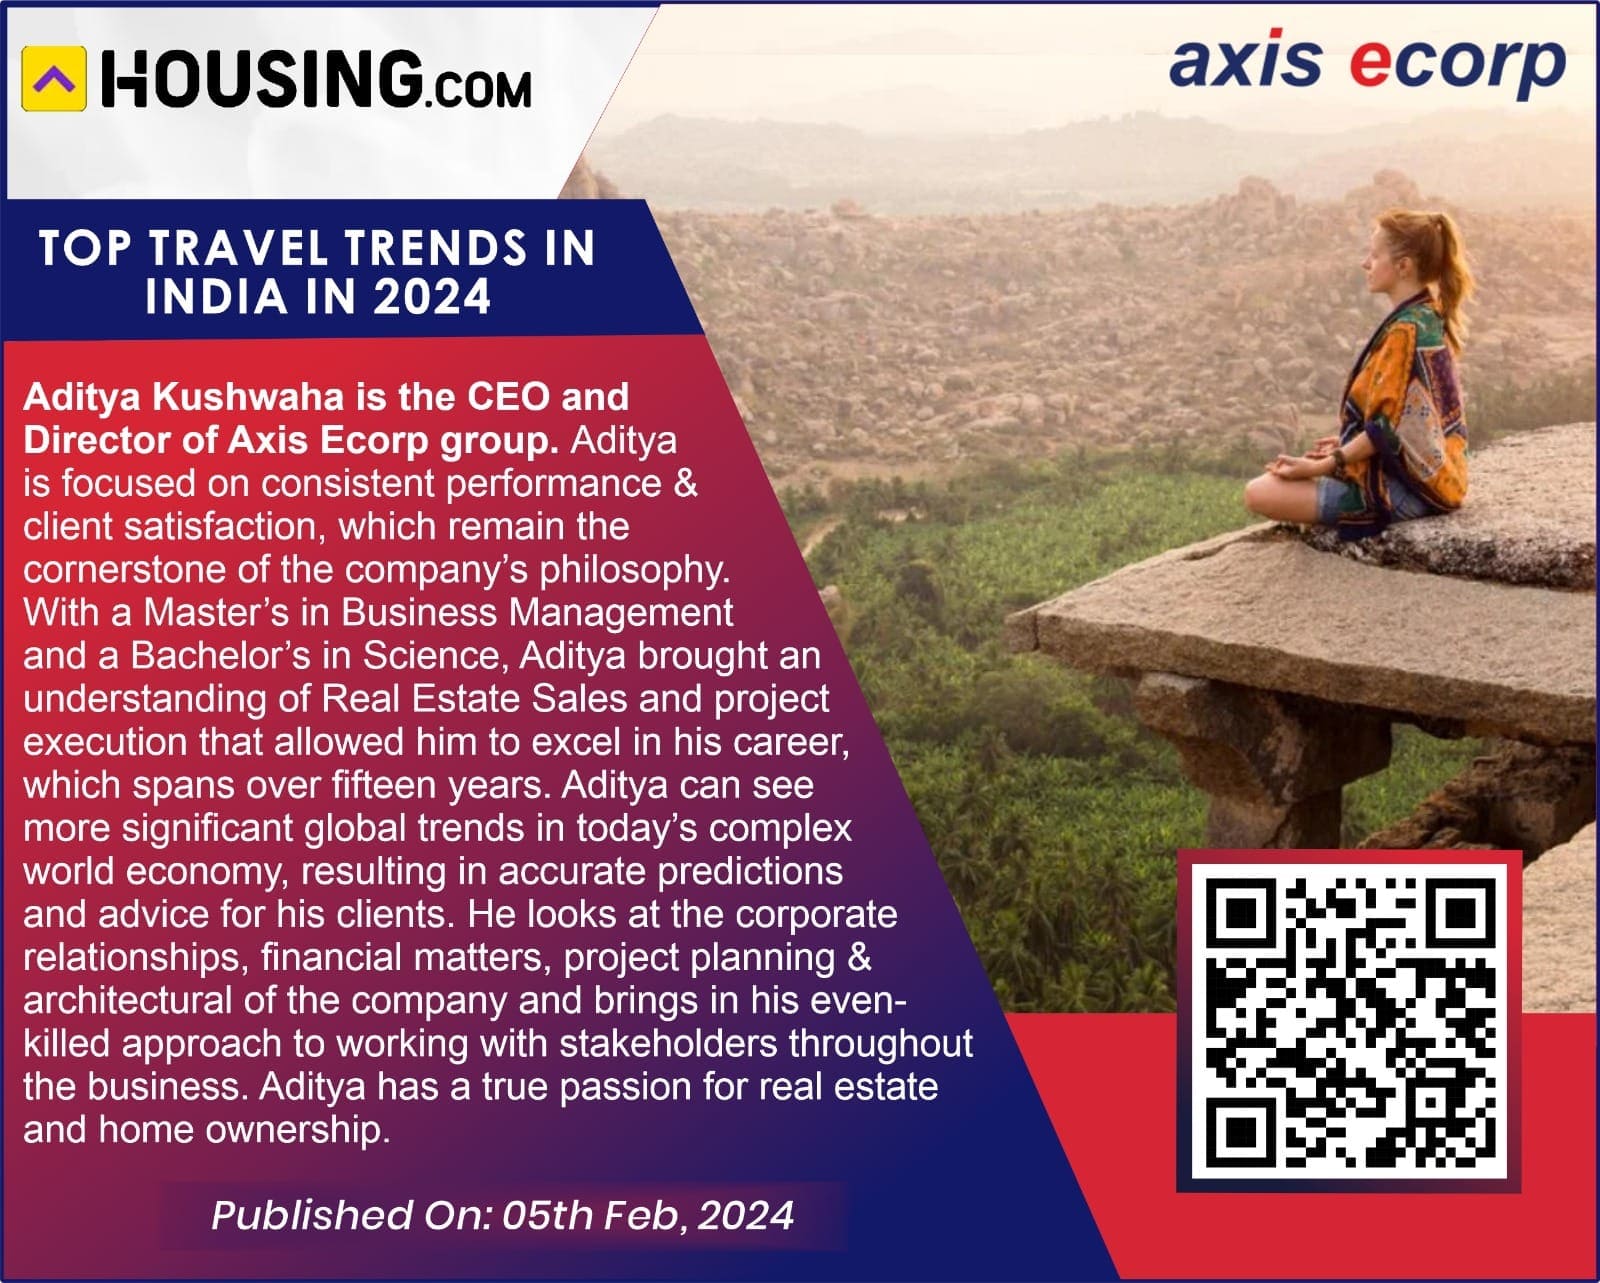 Top travel trends in India in 2024